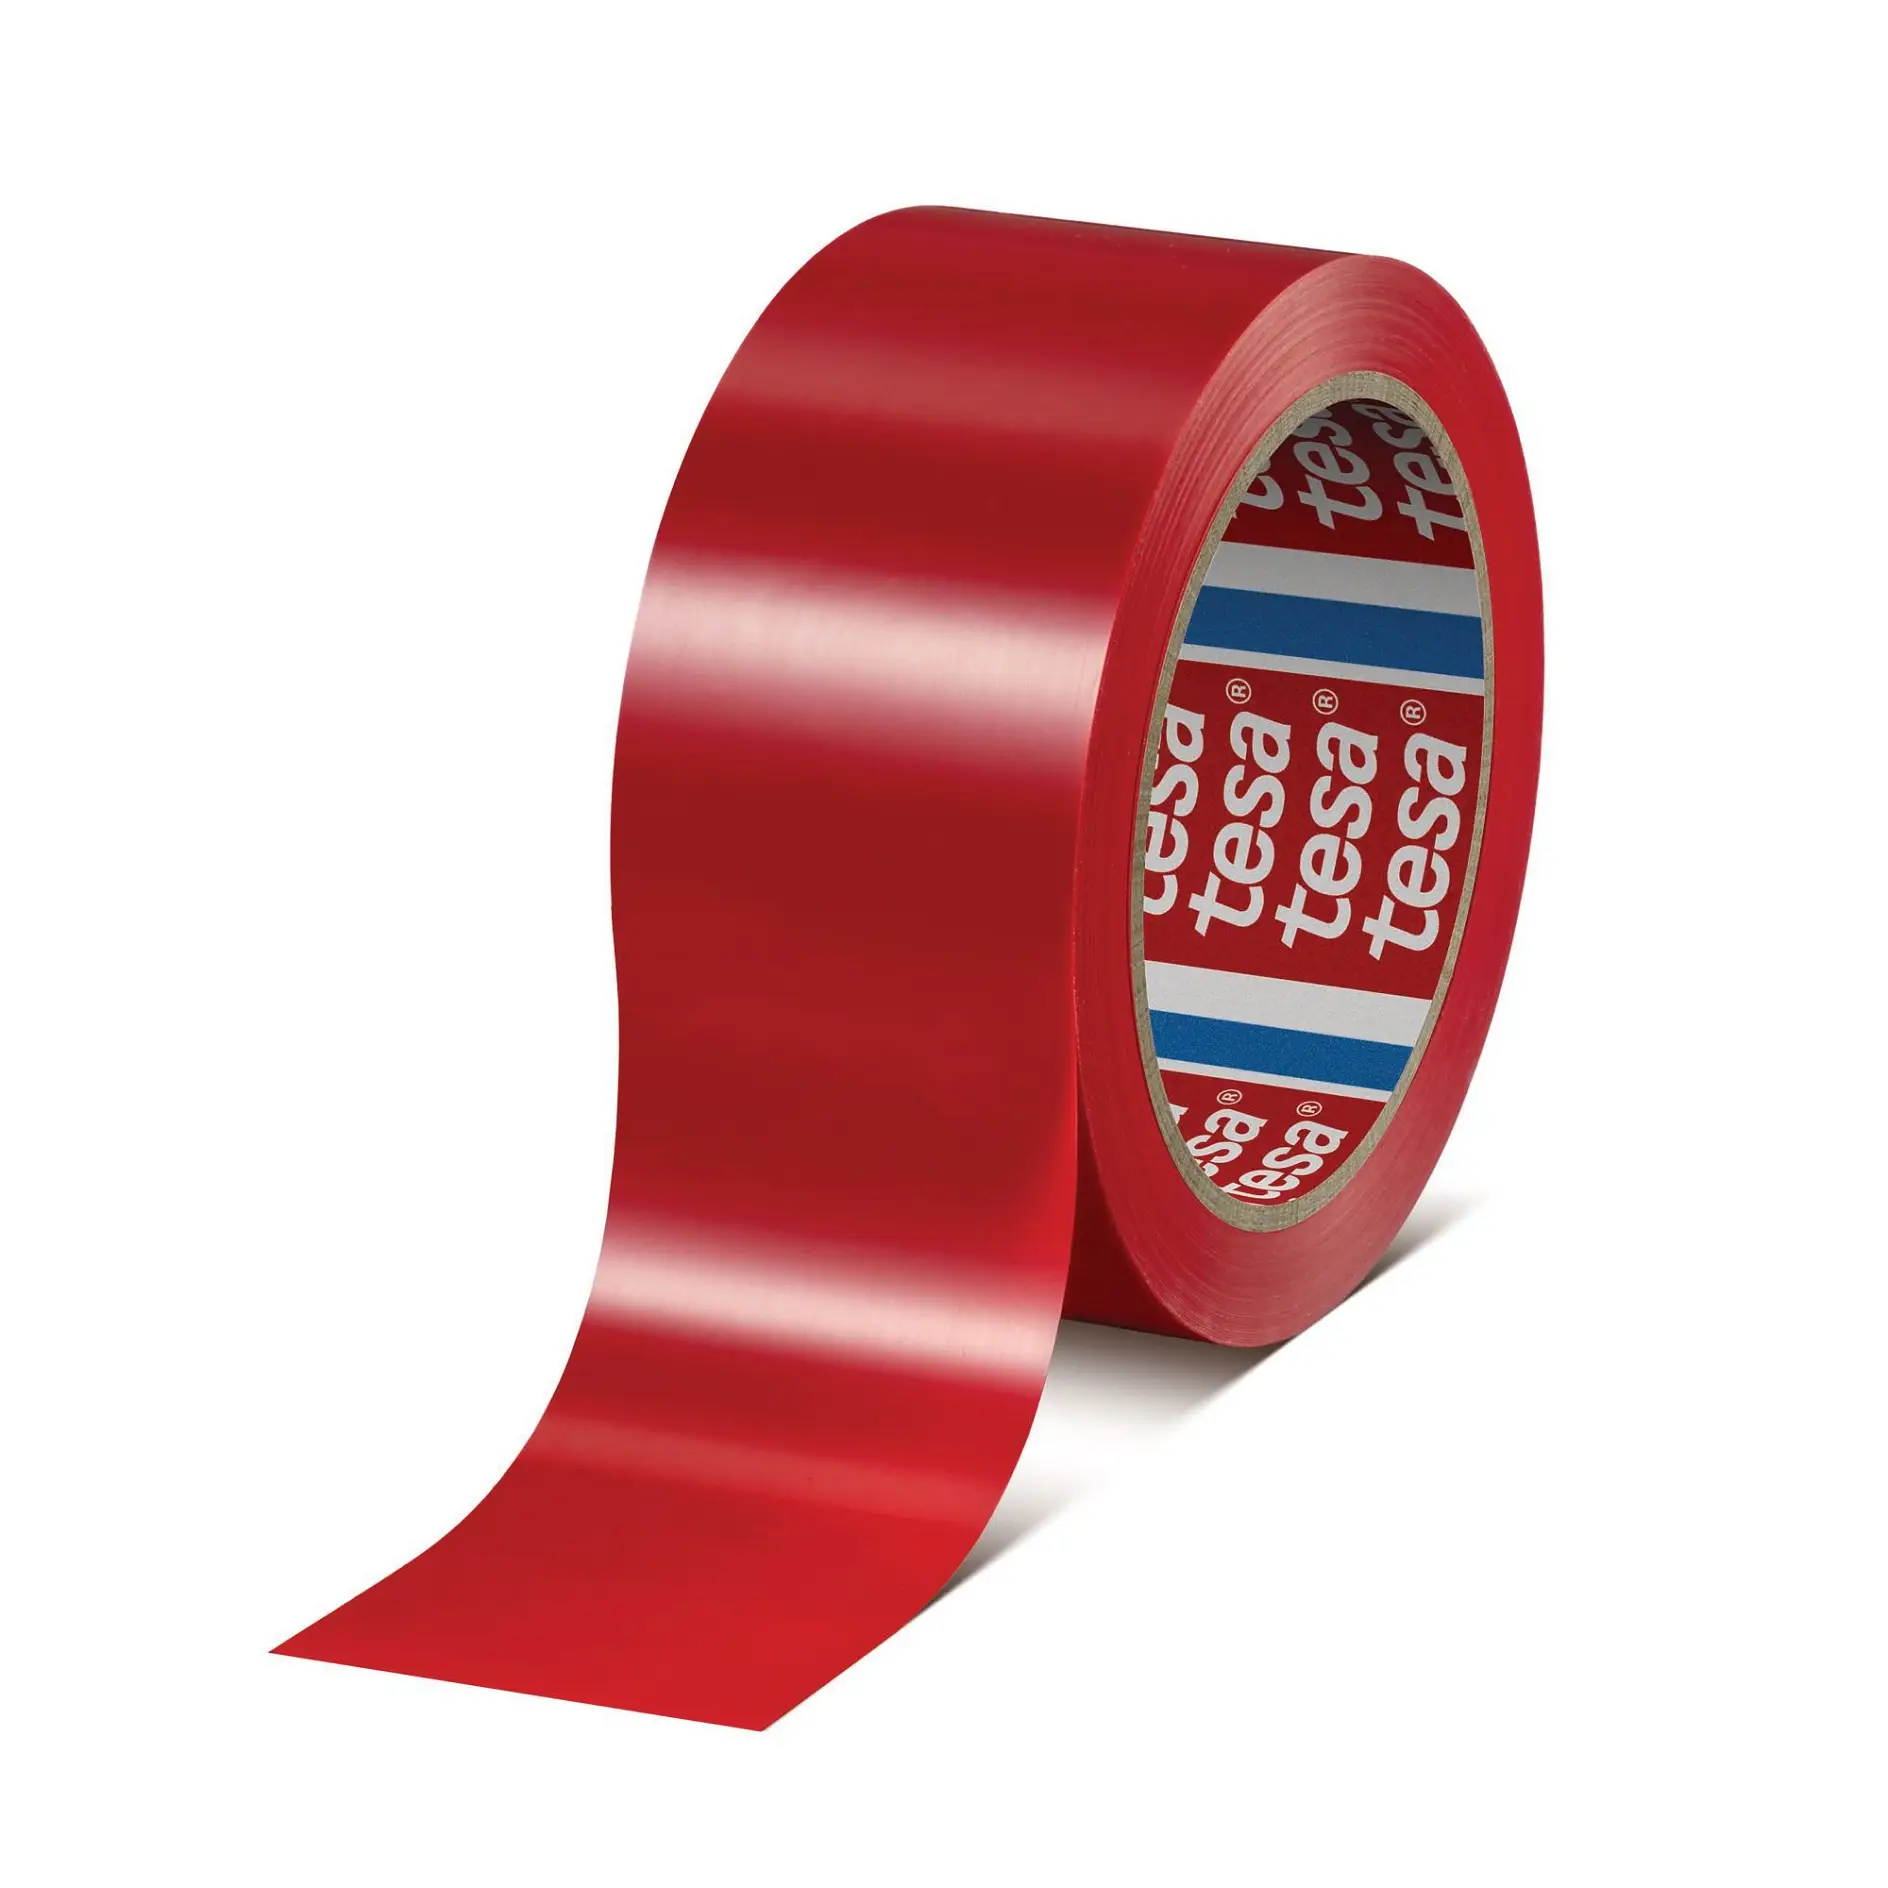 tesa-60428-premium-PVC-surface-protection-and-masking-tape-red-604280000200